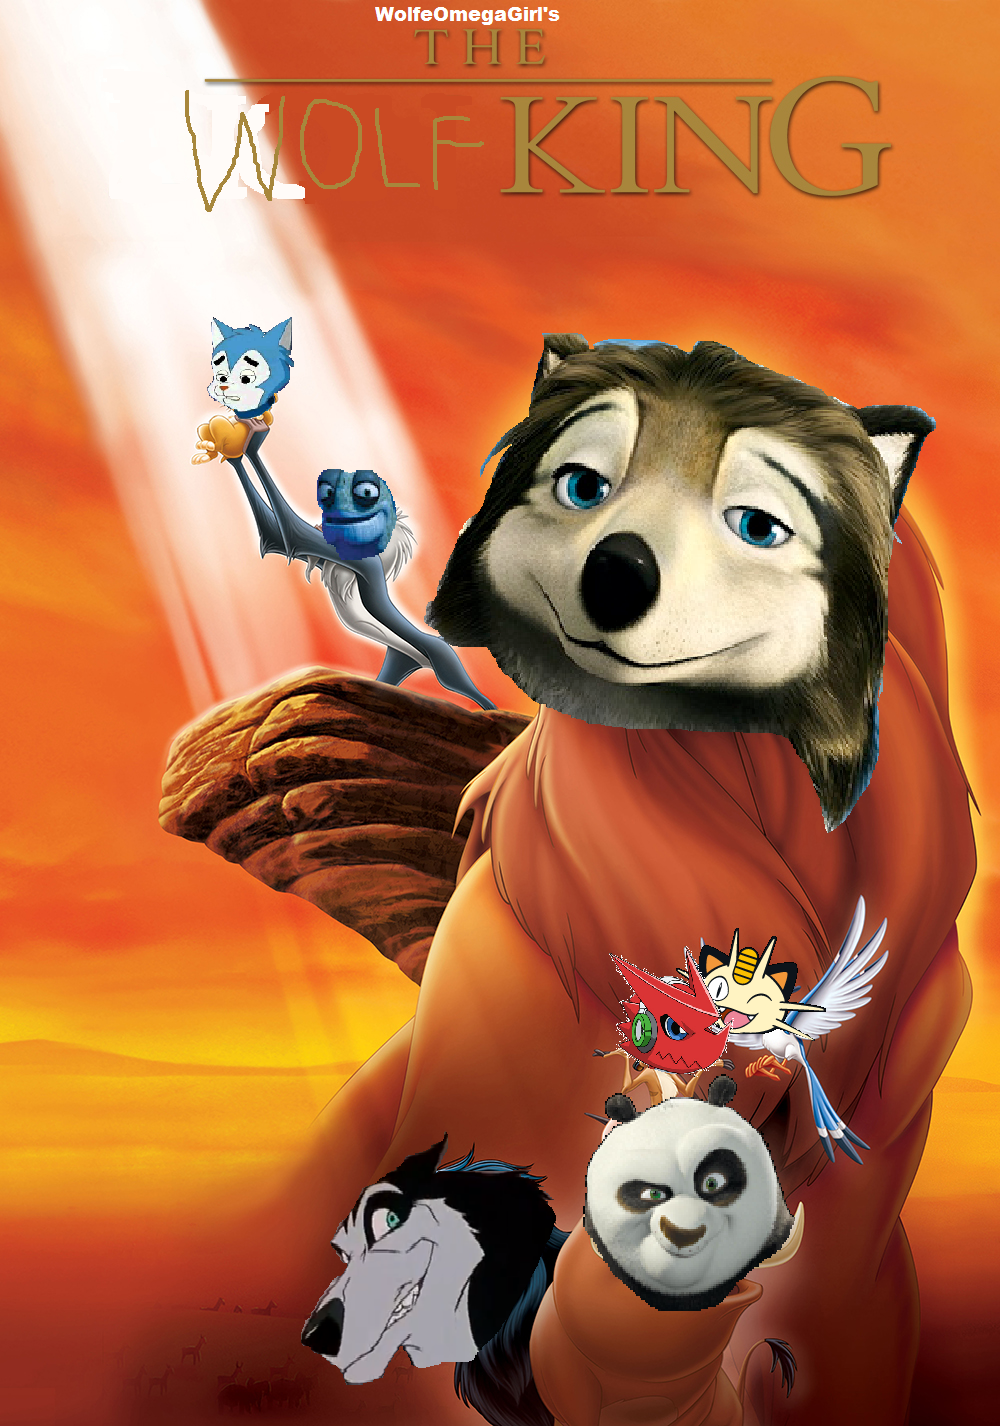 Image - The Wolf King.png | The Parody Wiki | FANDOM powered by Wikia